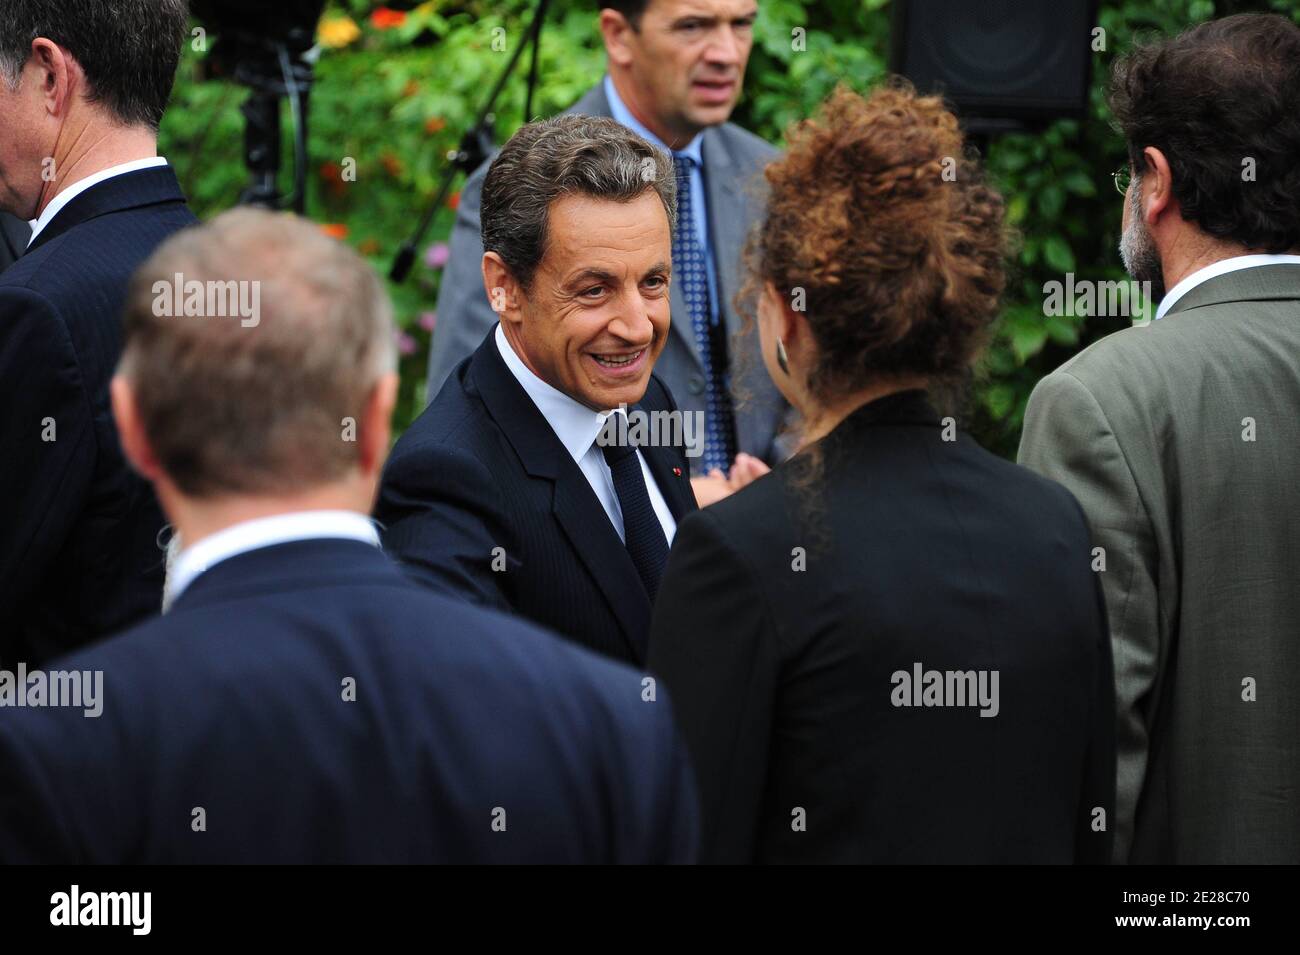 French President Nicolas Sarkozy is pictured during the celebration of 10th Anniversary of the September 11 at US Embassy in Paris, France on September 9, 2011. Photo by Mousse/ABACAPRESS.COM Stock Photo